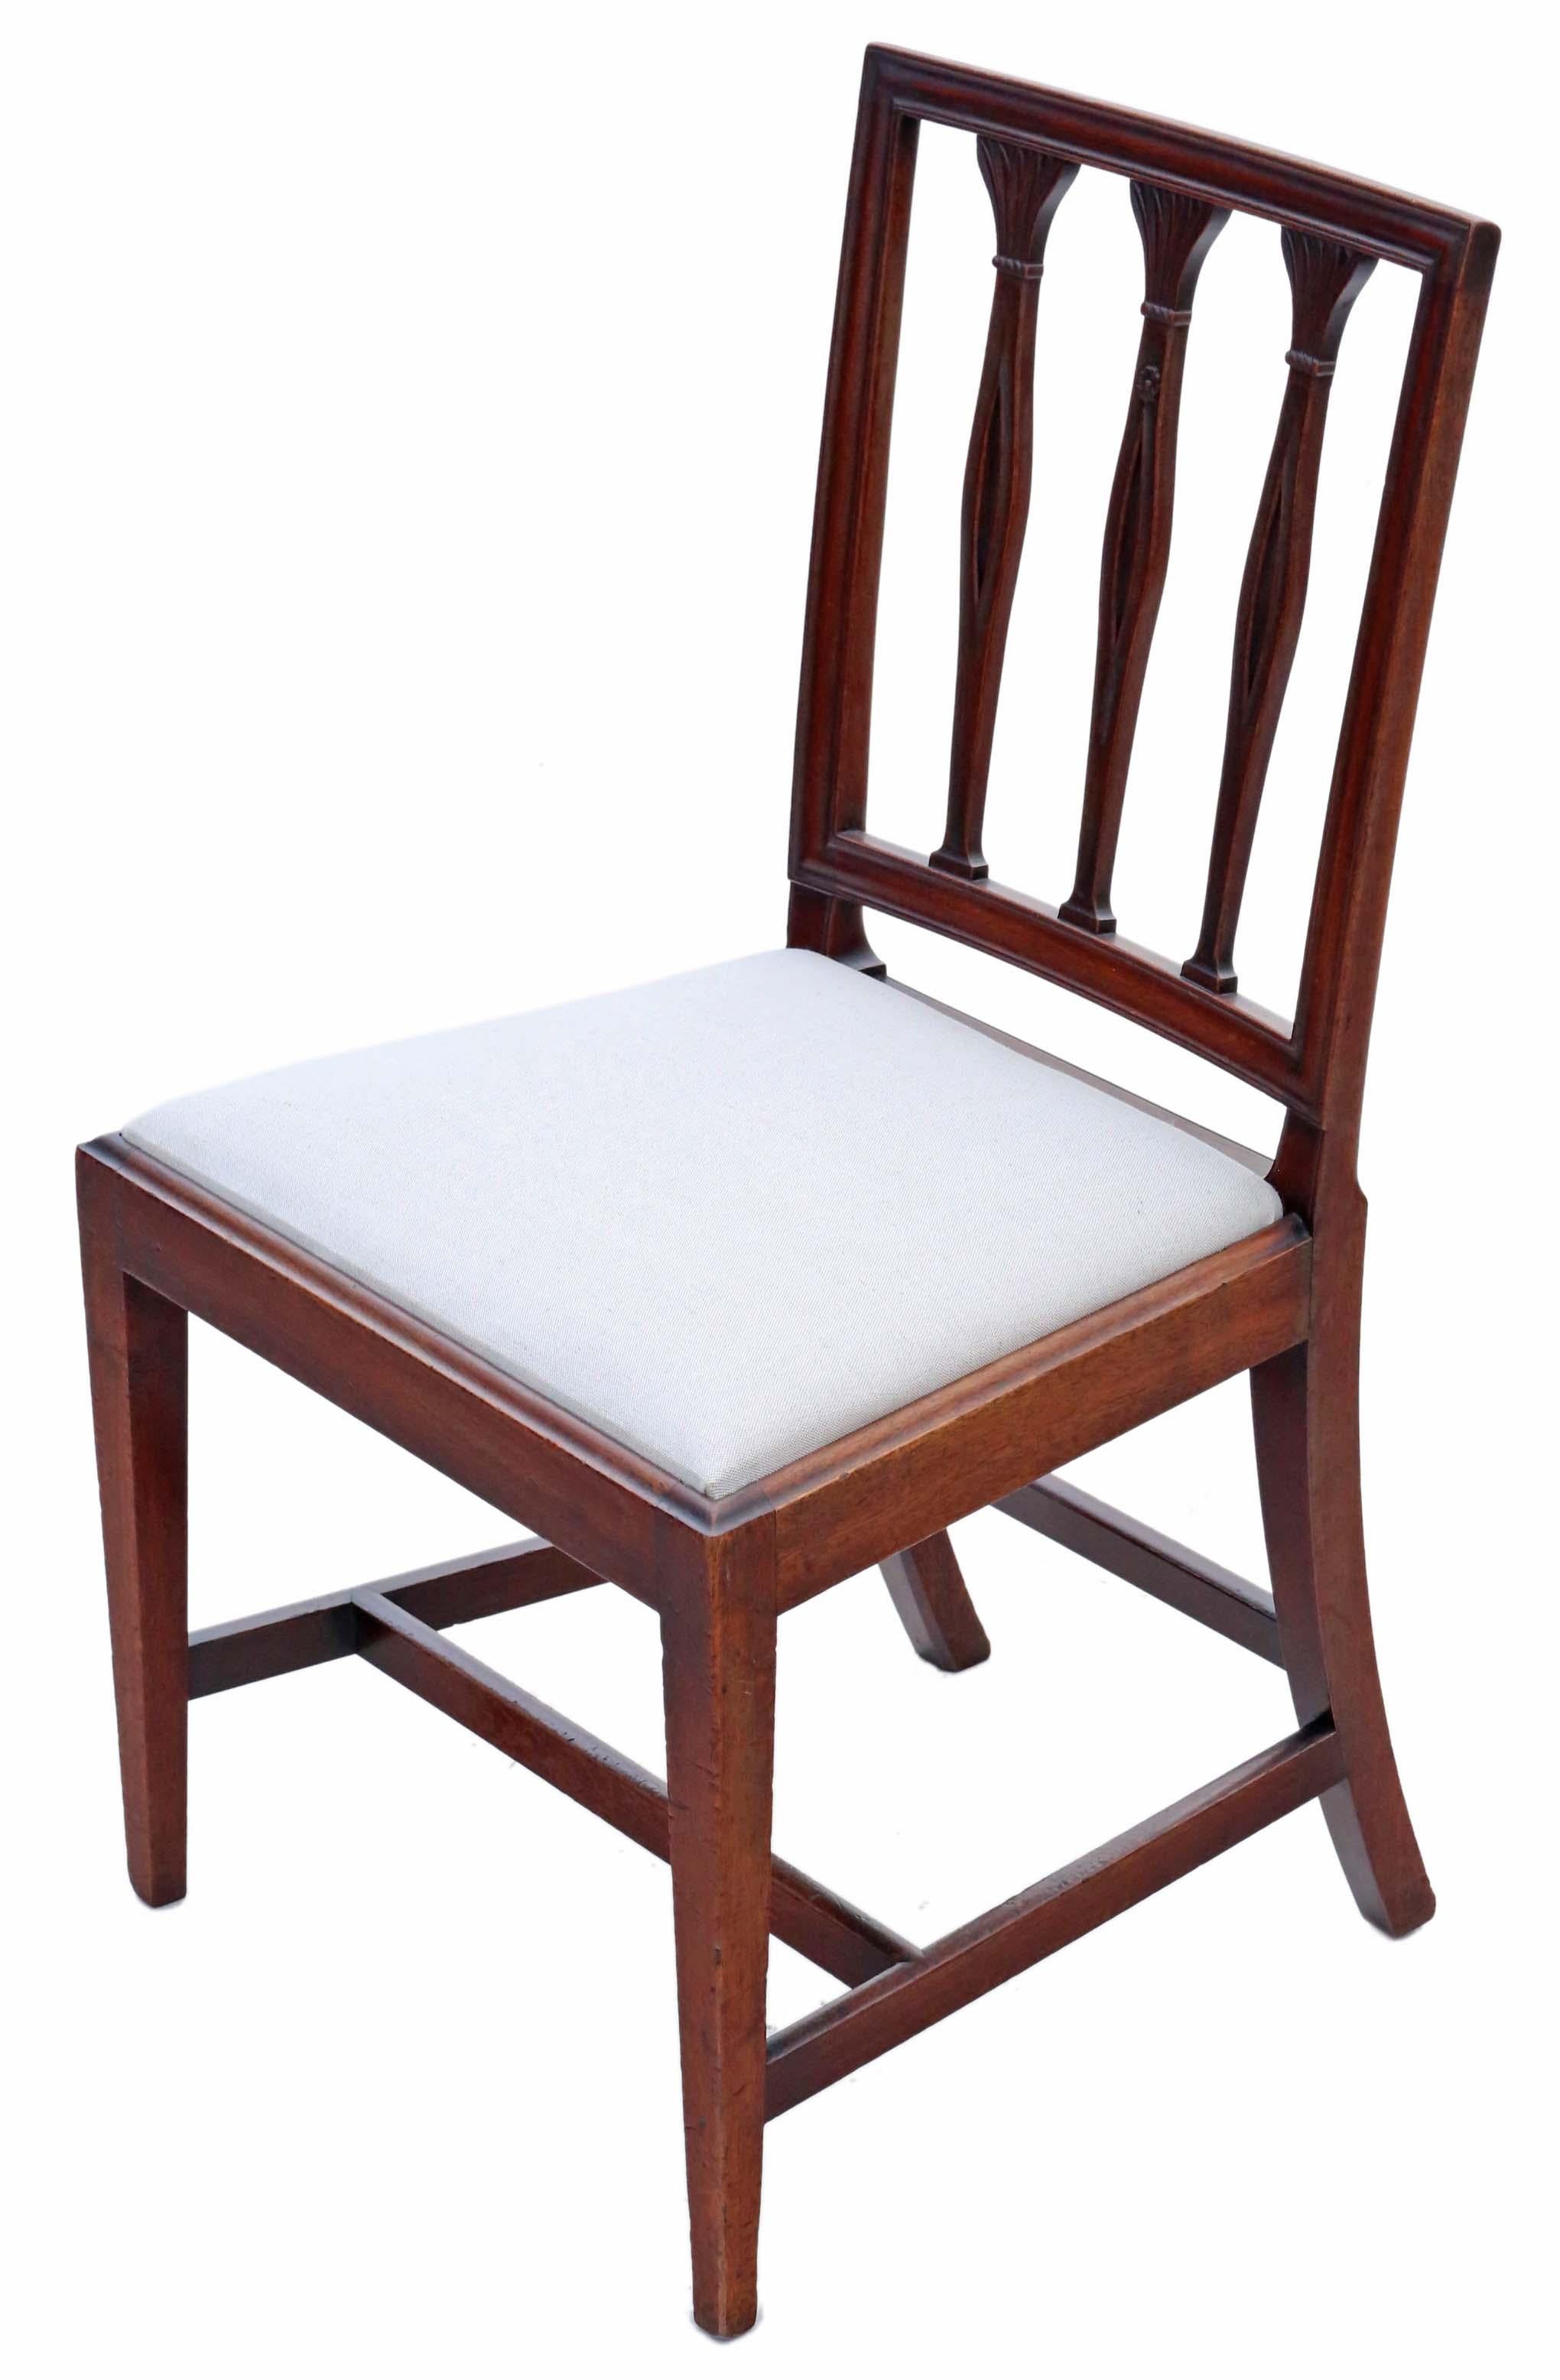 18th Century Mahogany Dining Chairs: Set of 8 (6 + 2), Antique Quality, C1820 For Sale 4